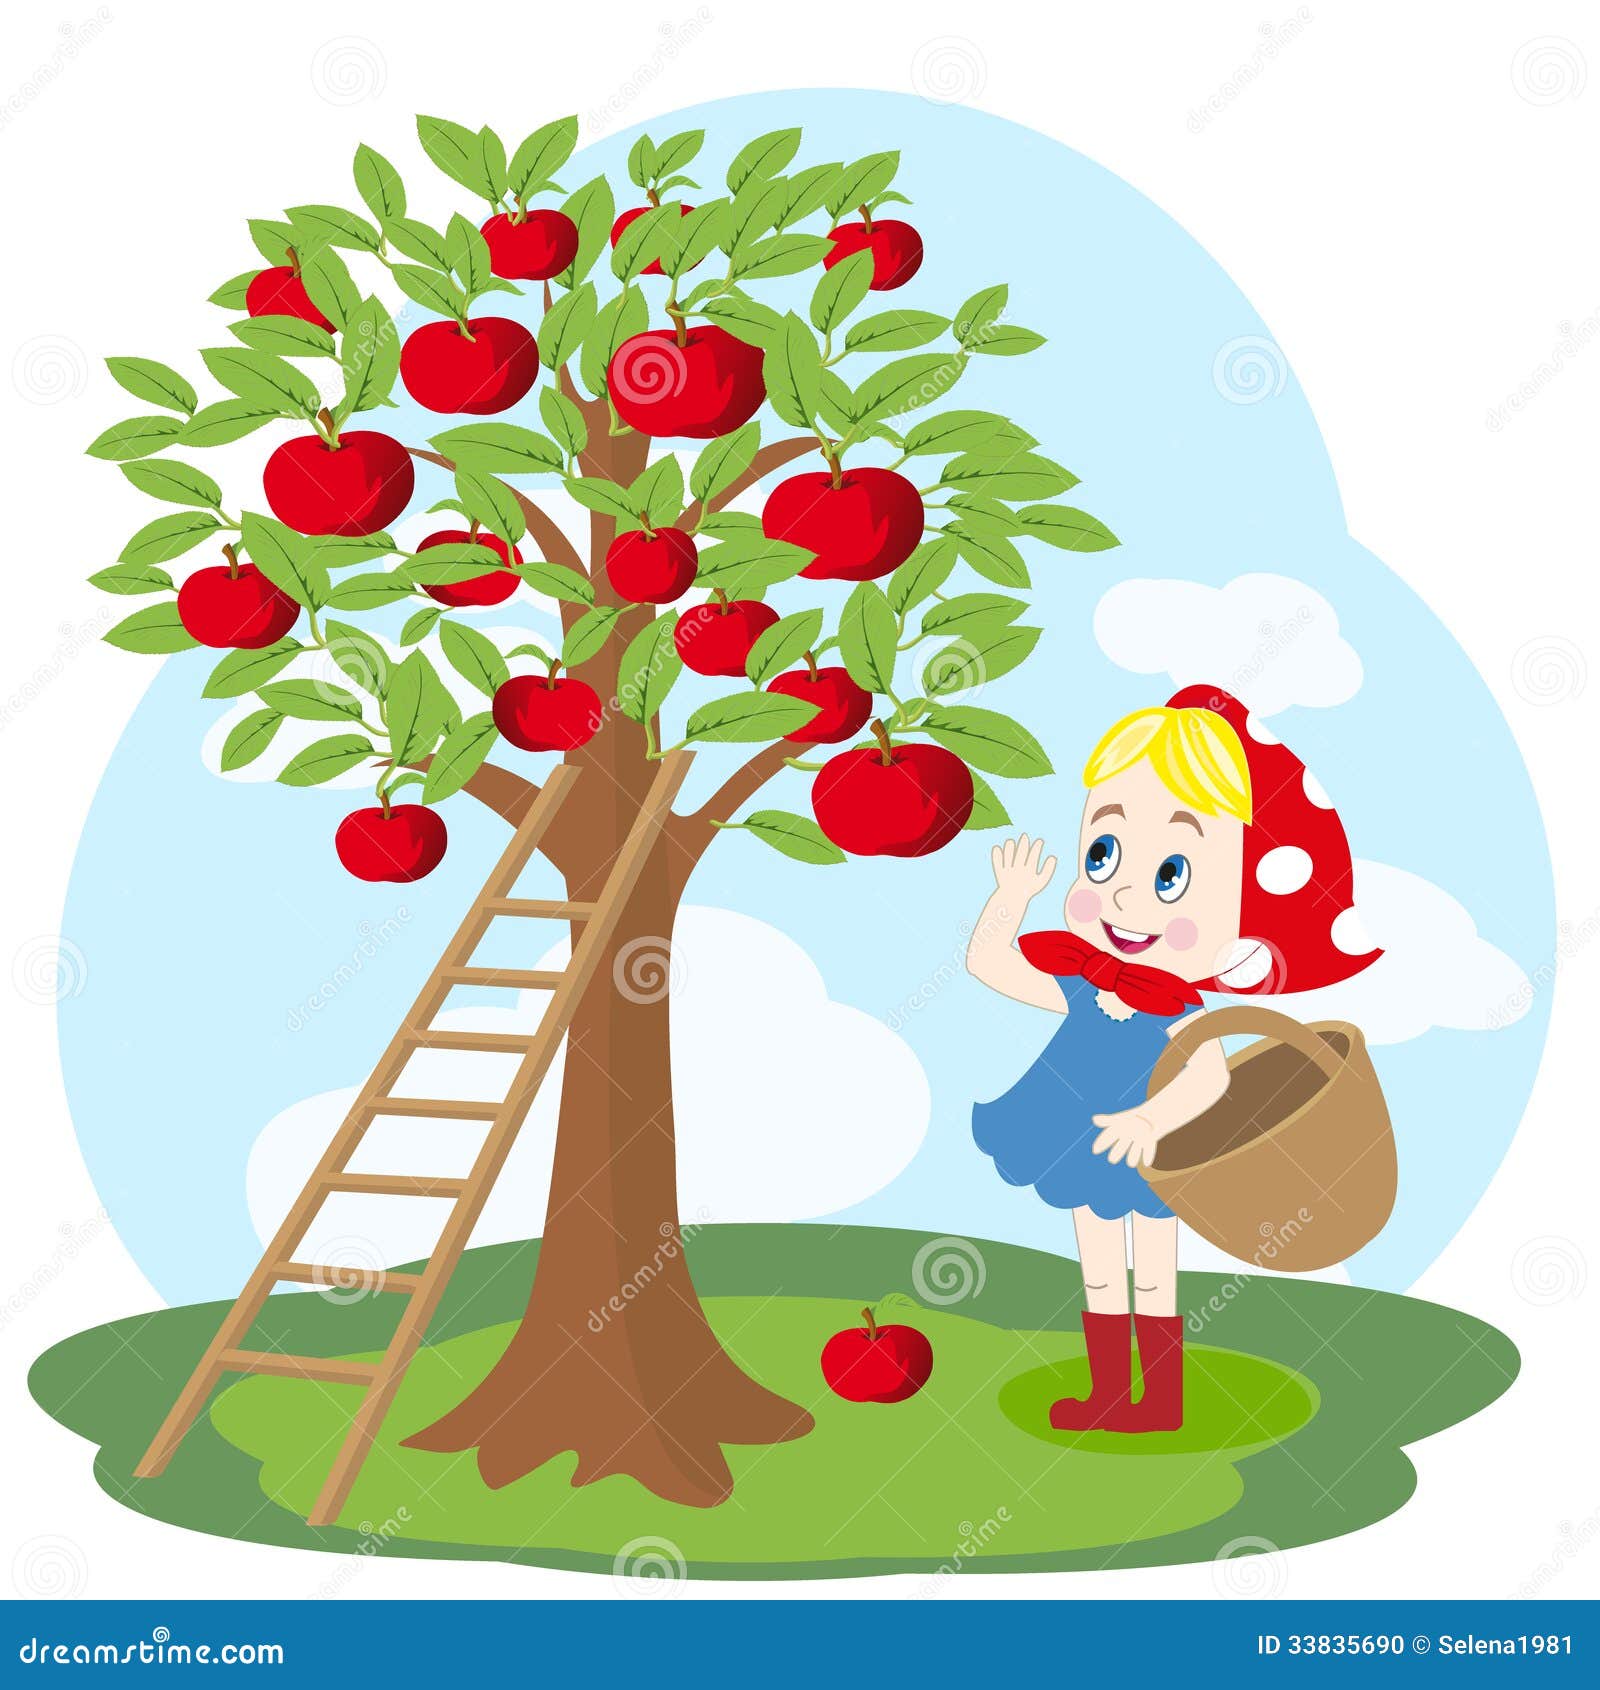 Girl with Basket and Apple Tree Stock Vector - Illustration of comic ...